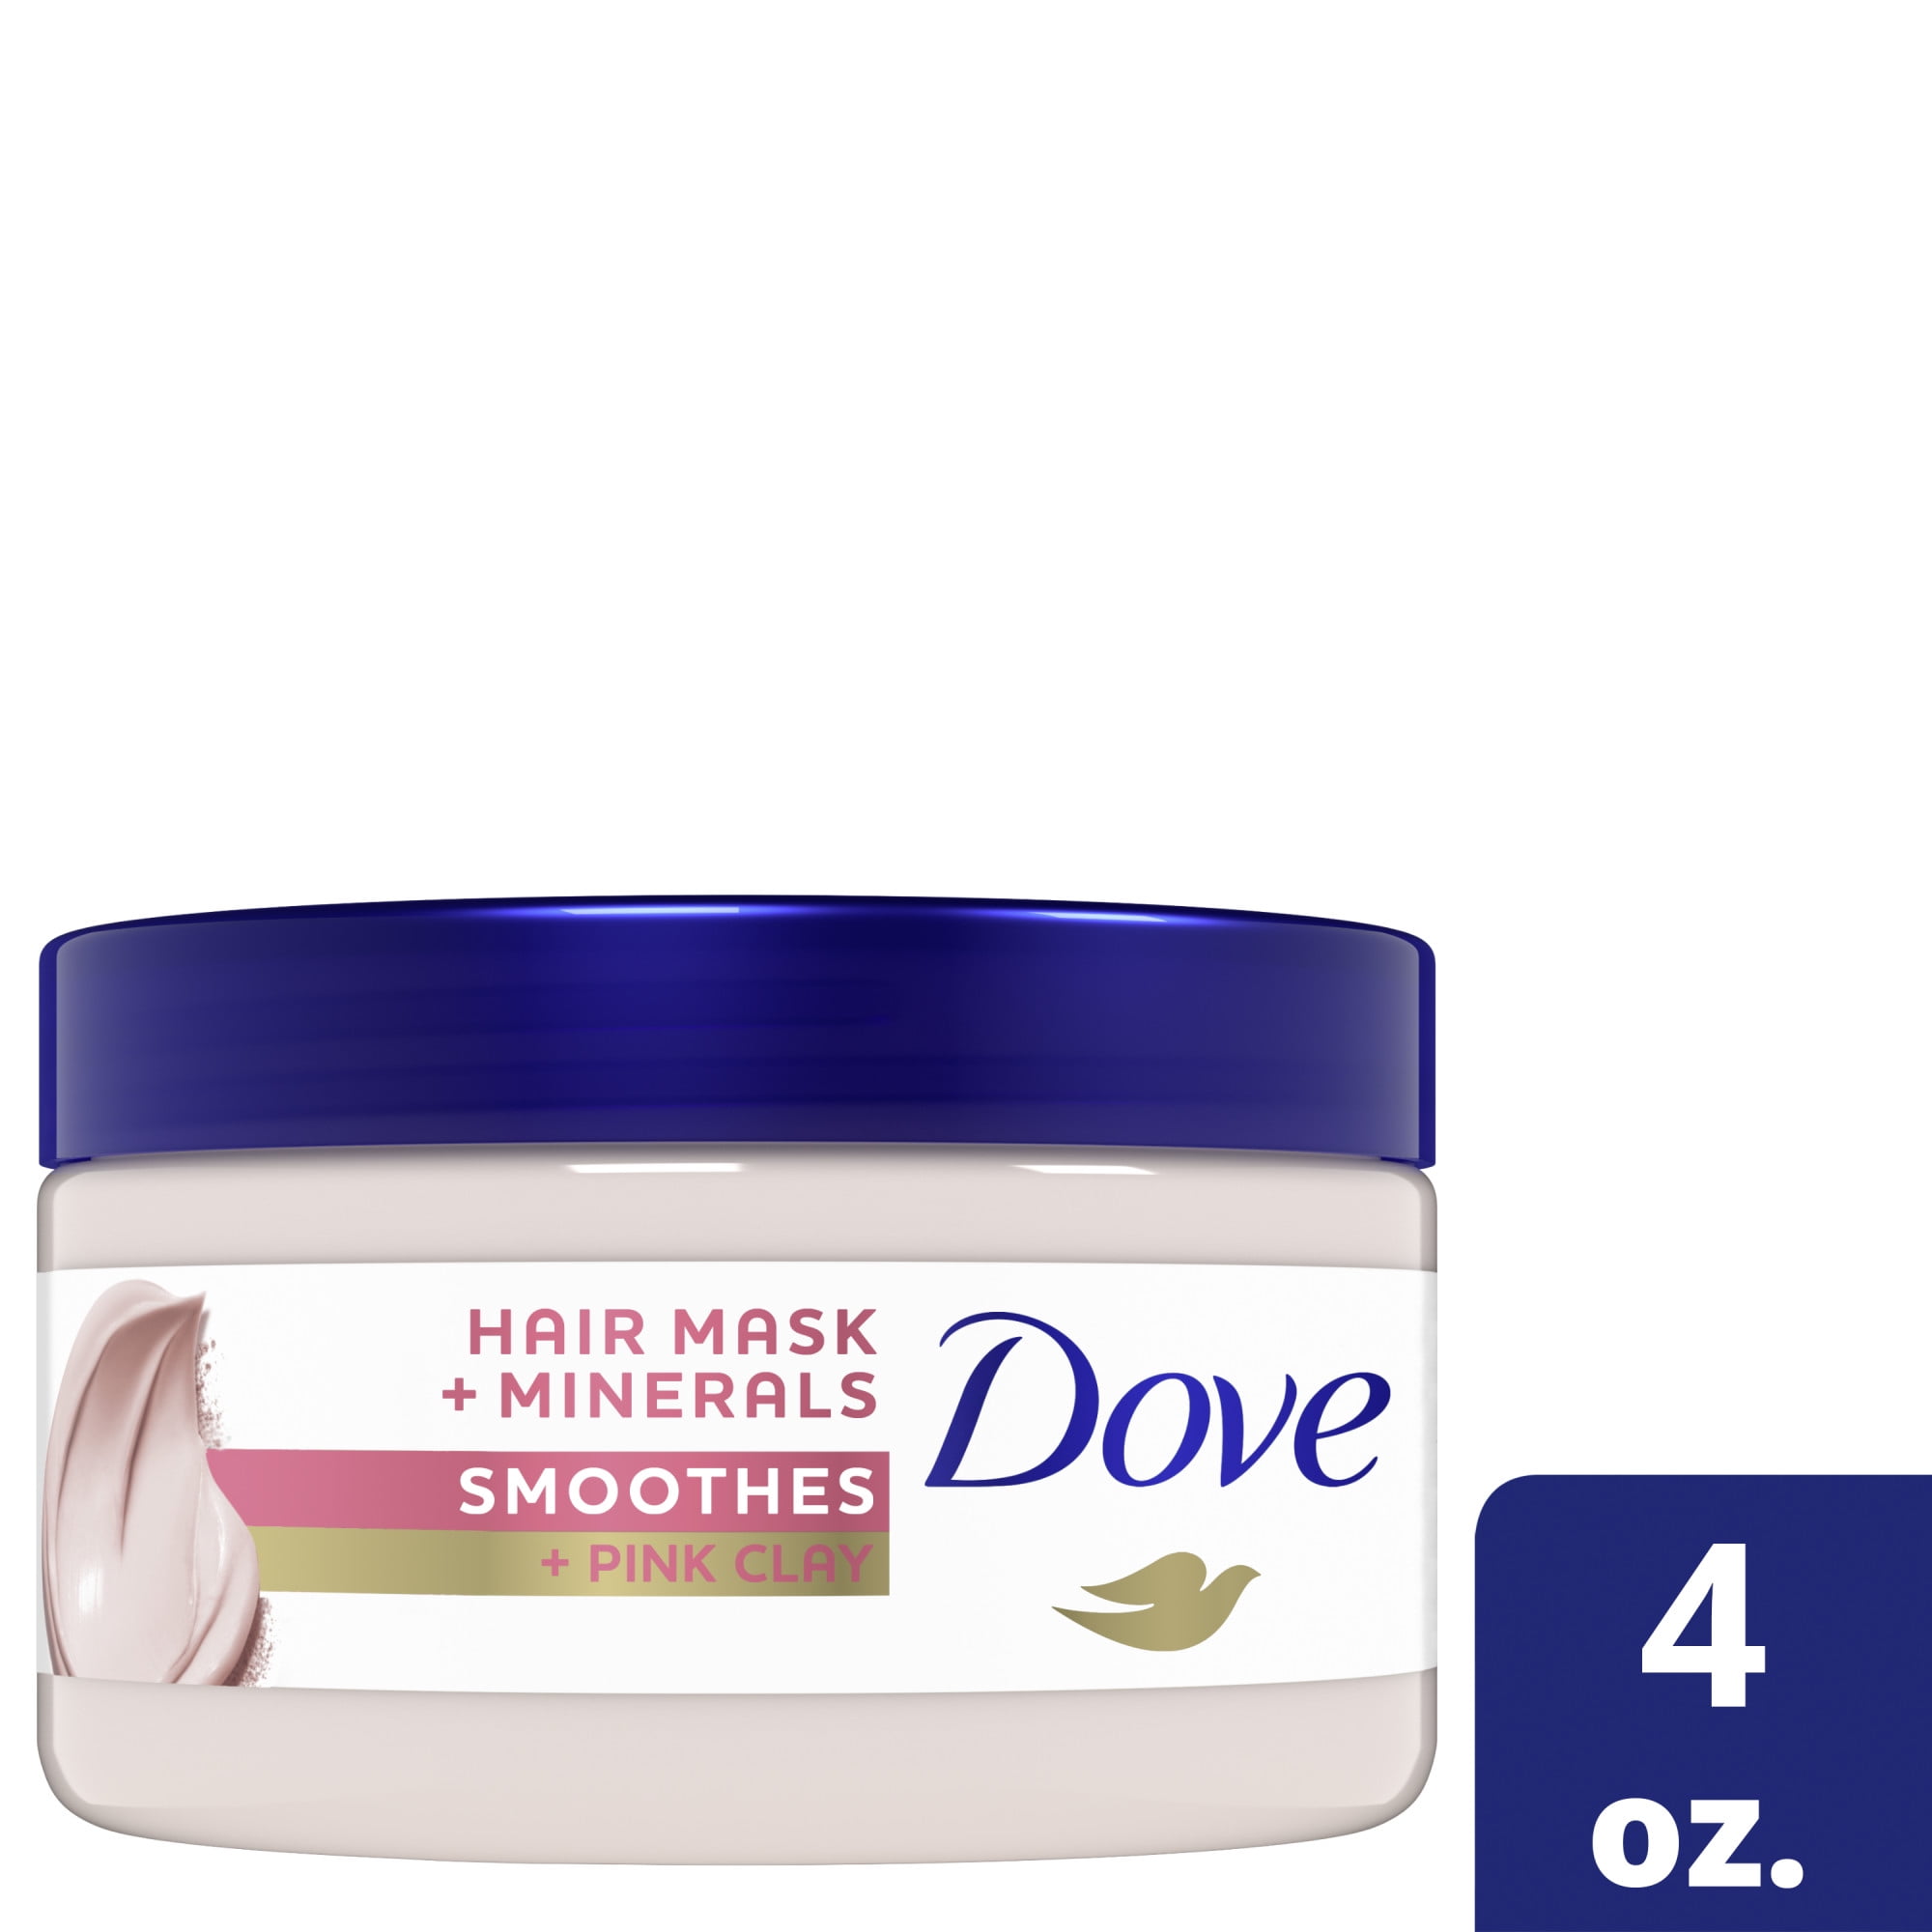 Dove Smooth Mineral nourishing Hair Mask, 4 oz 